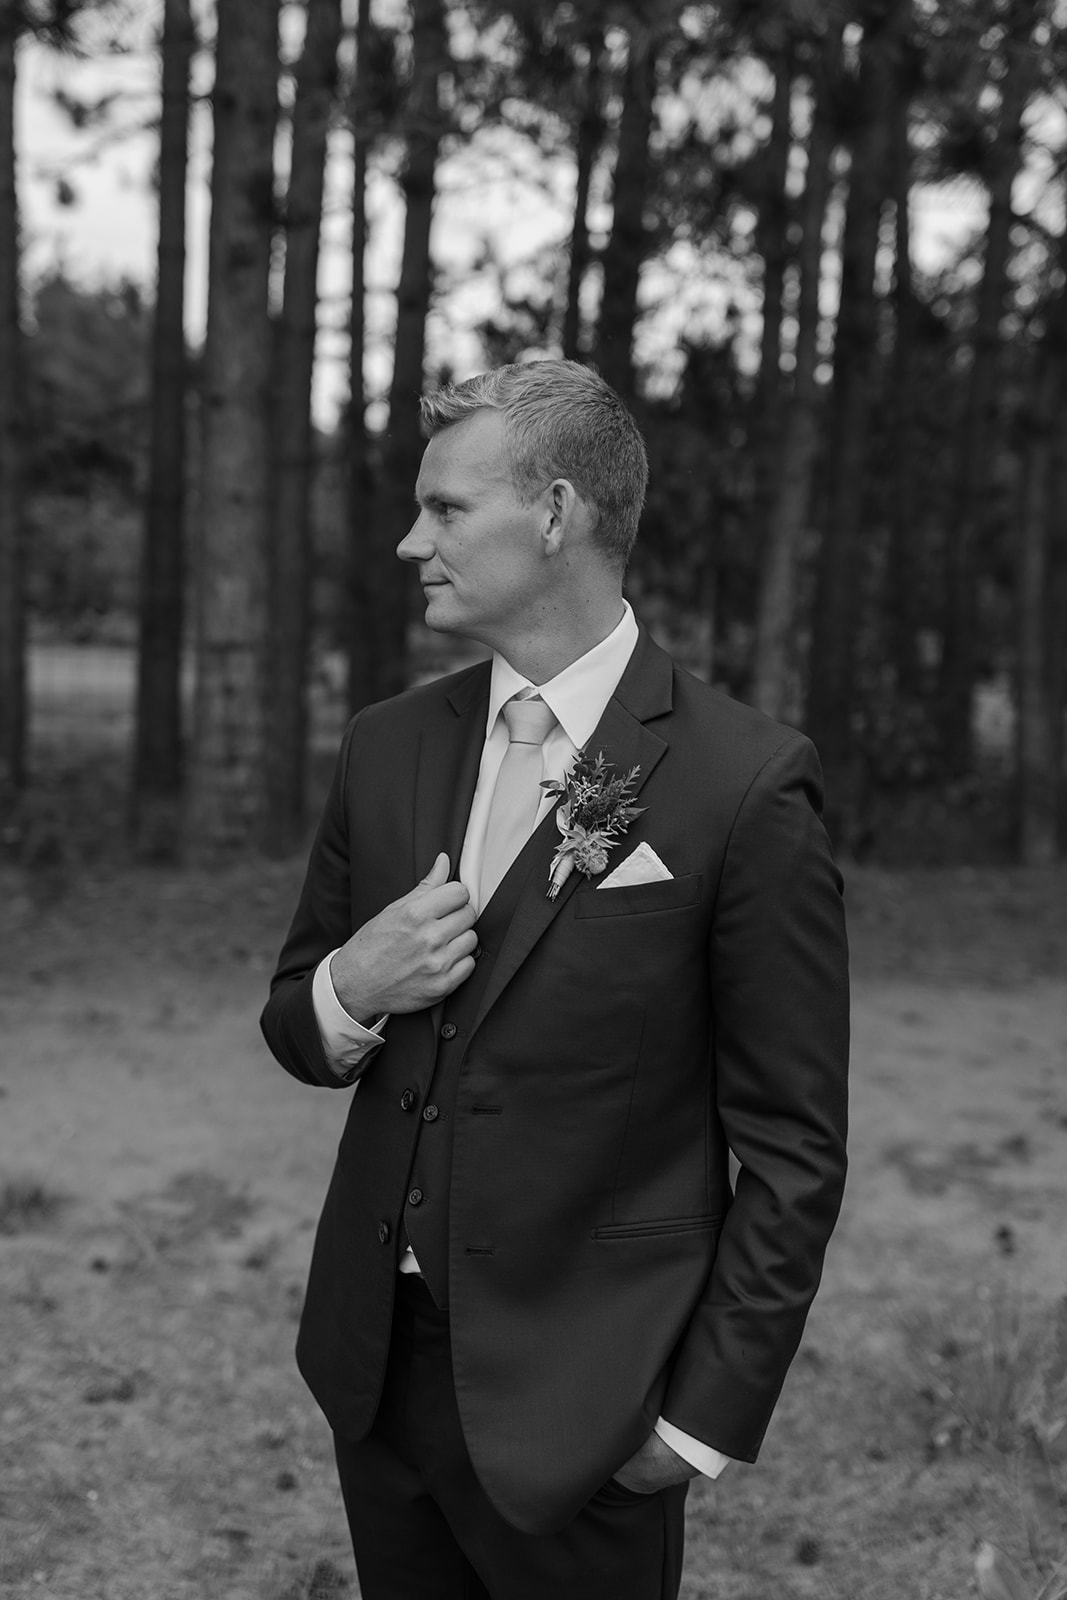 Groom looks away from the camera while holding his lapel